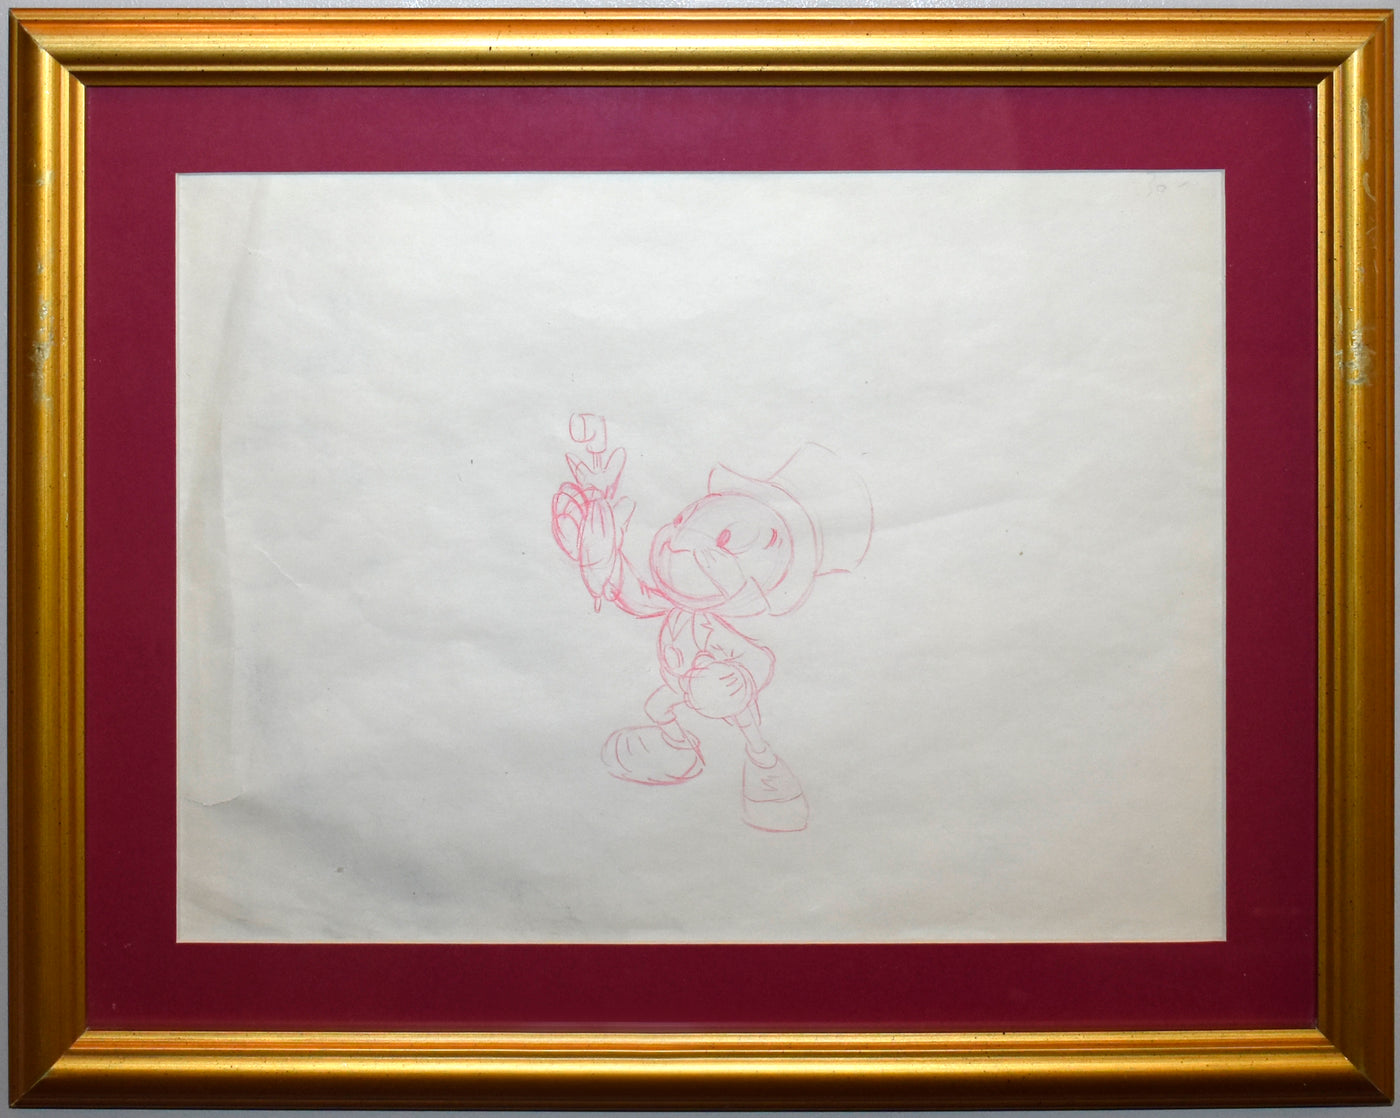 Original Walt Disney Production Drawing from Pinocchio featuring Jiminy Cricket